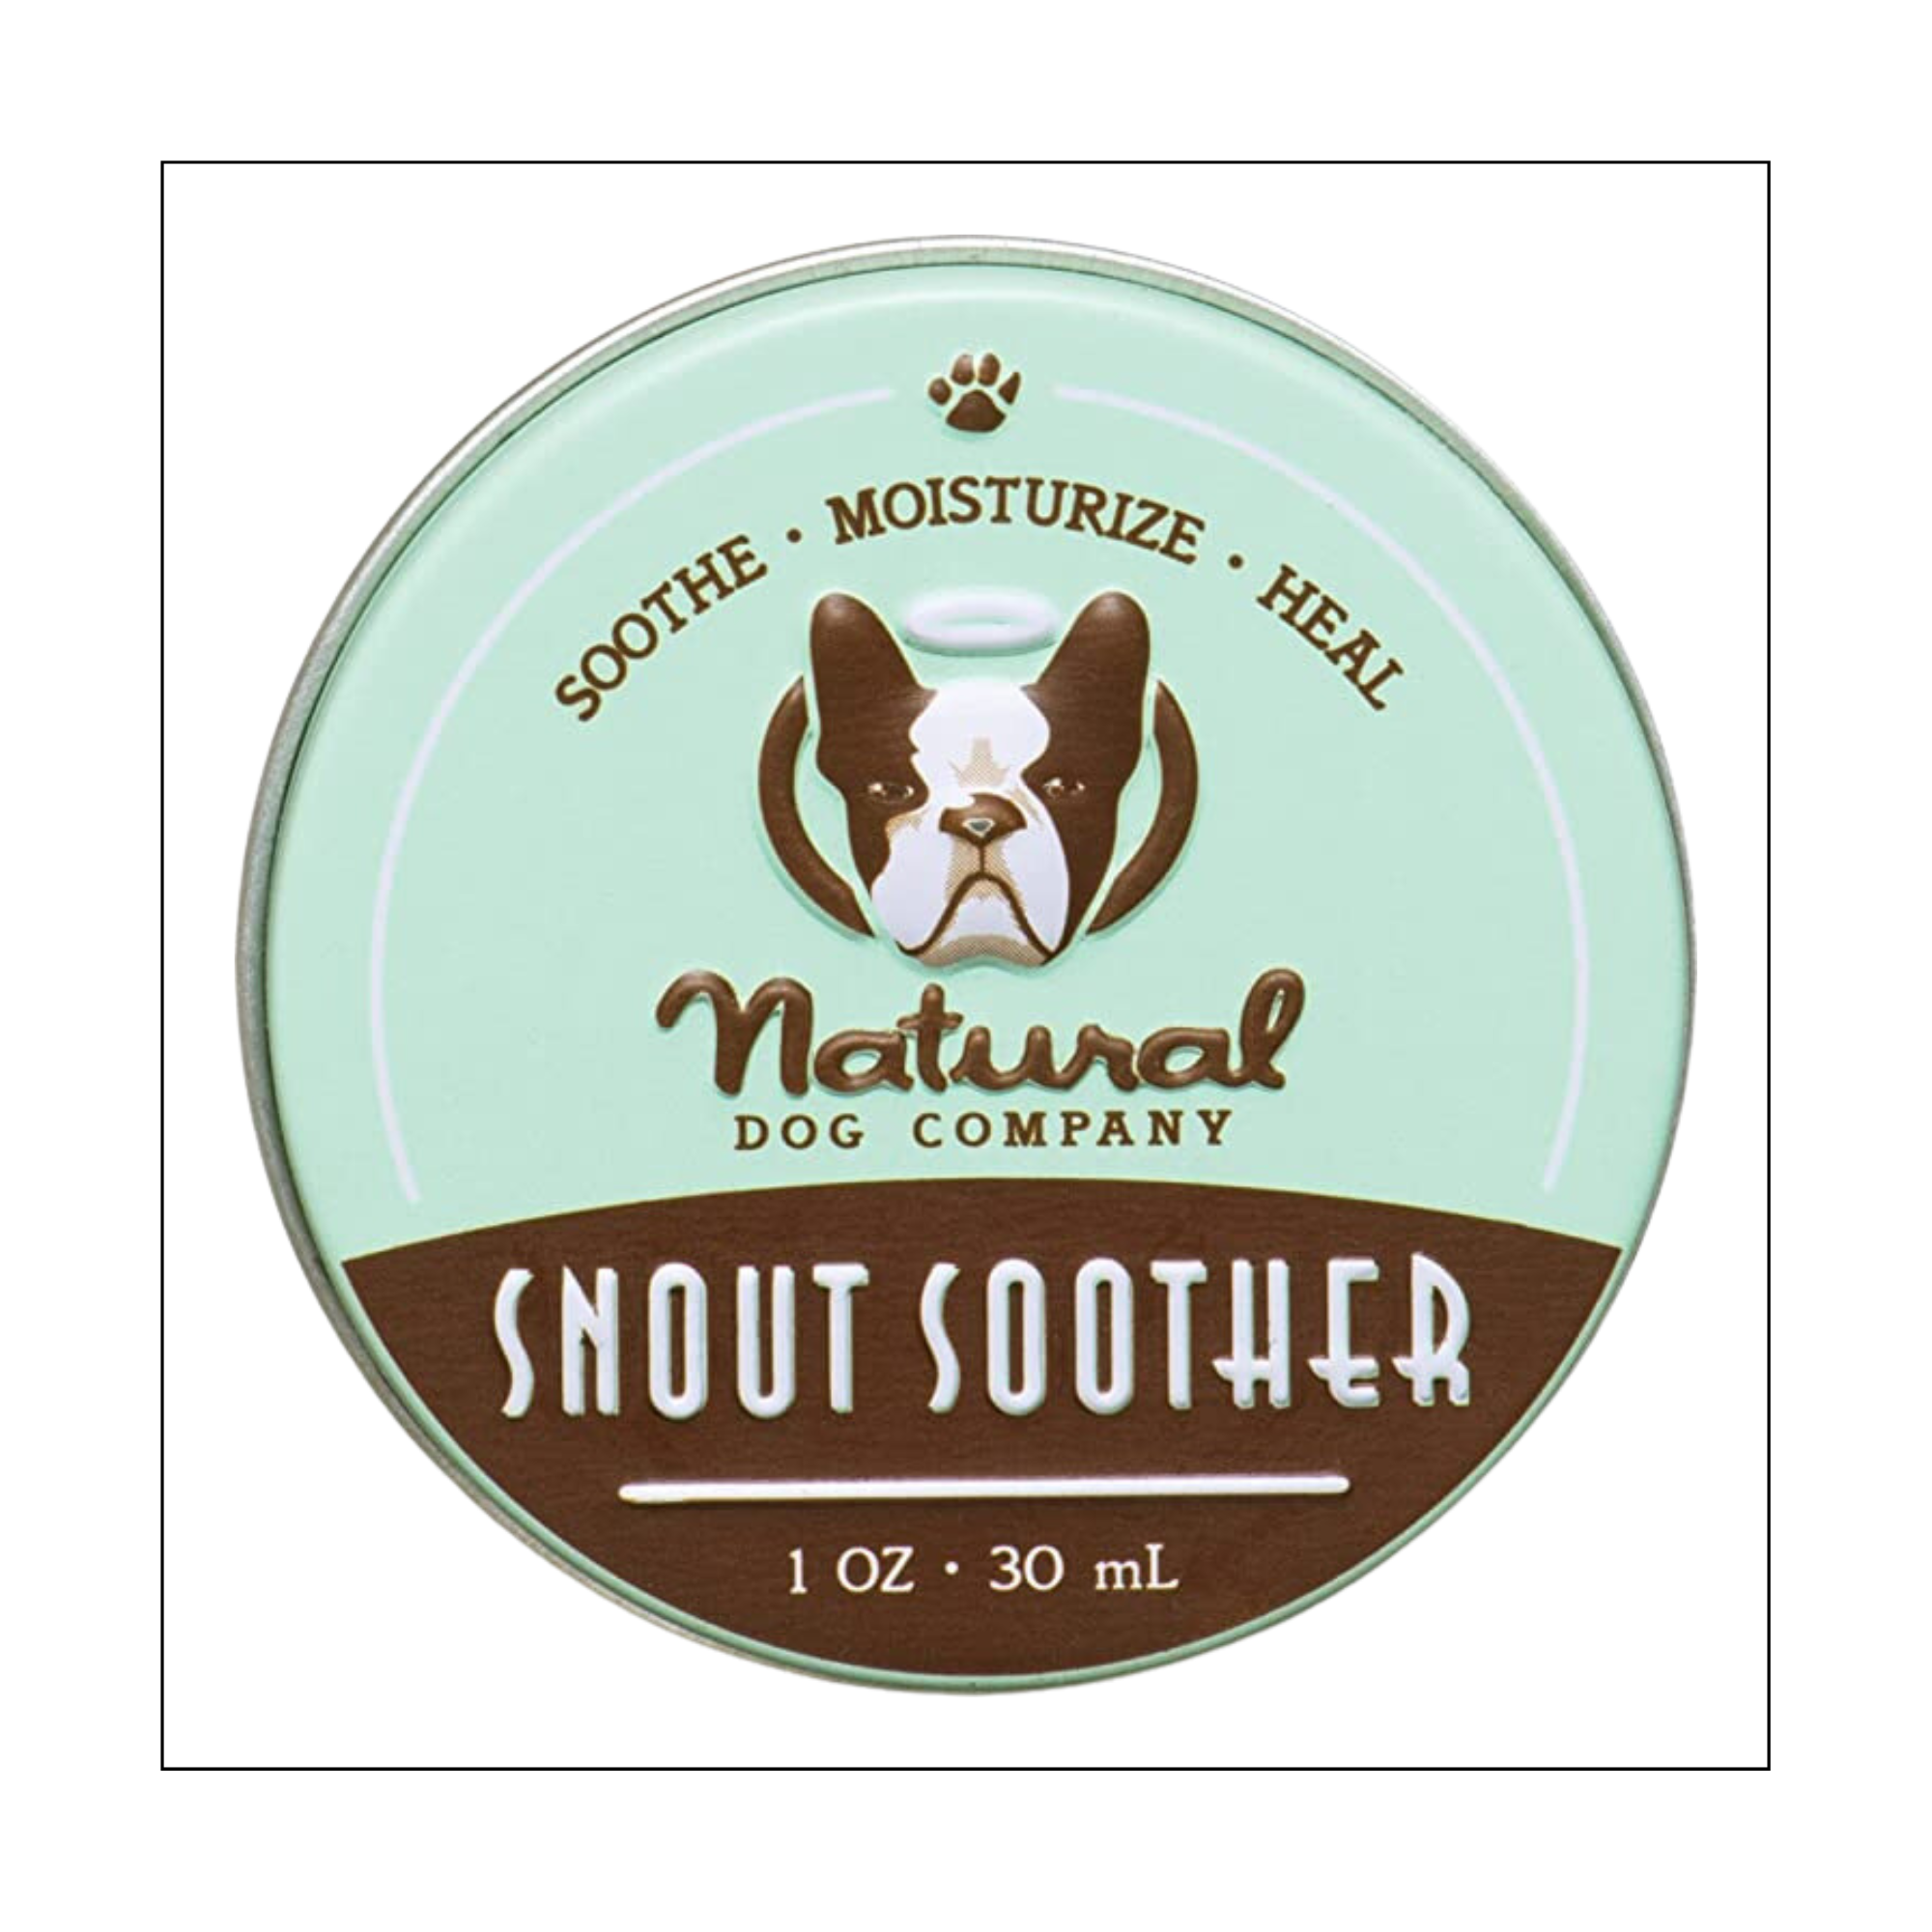 Natural Dog Company Snout Soother Dog Nose Balm 